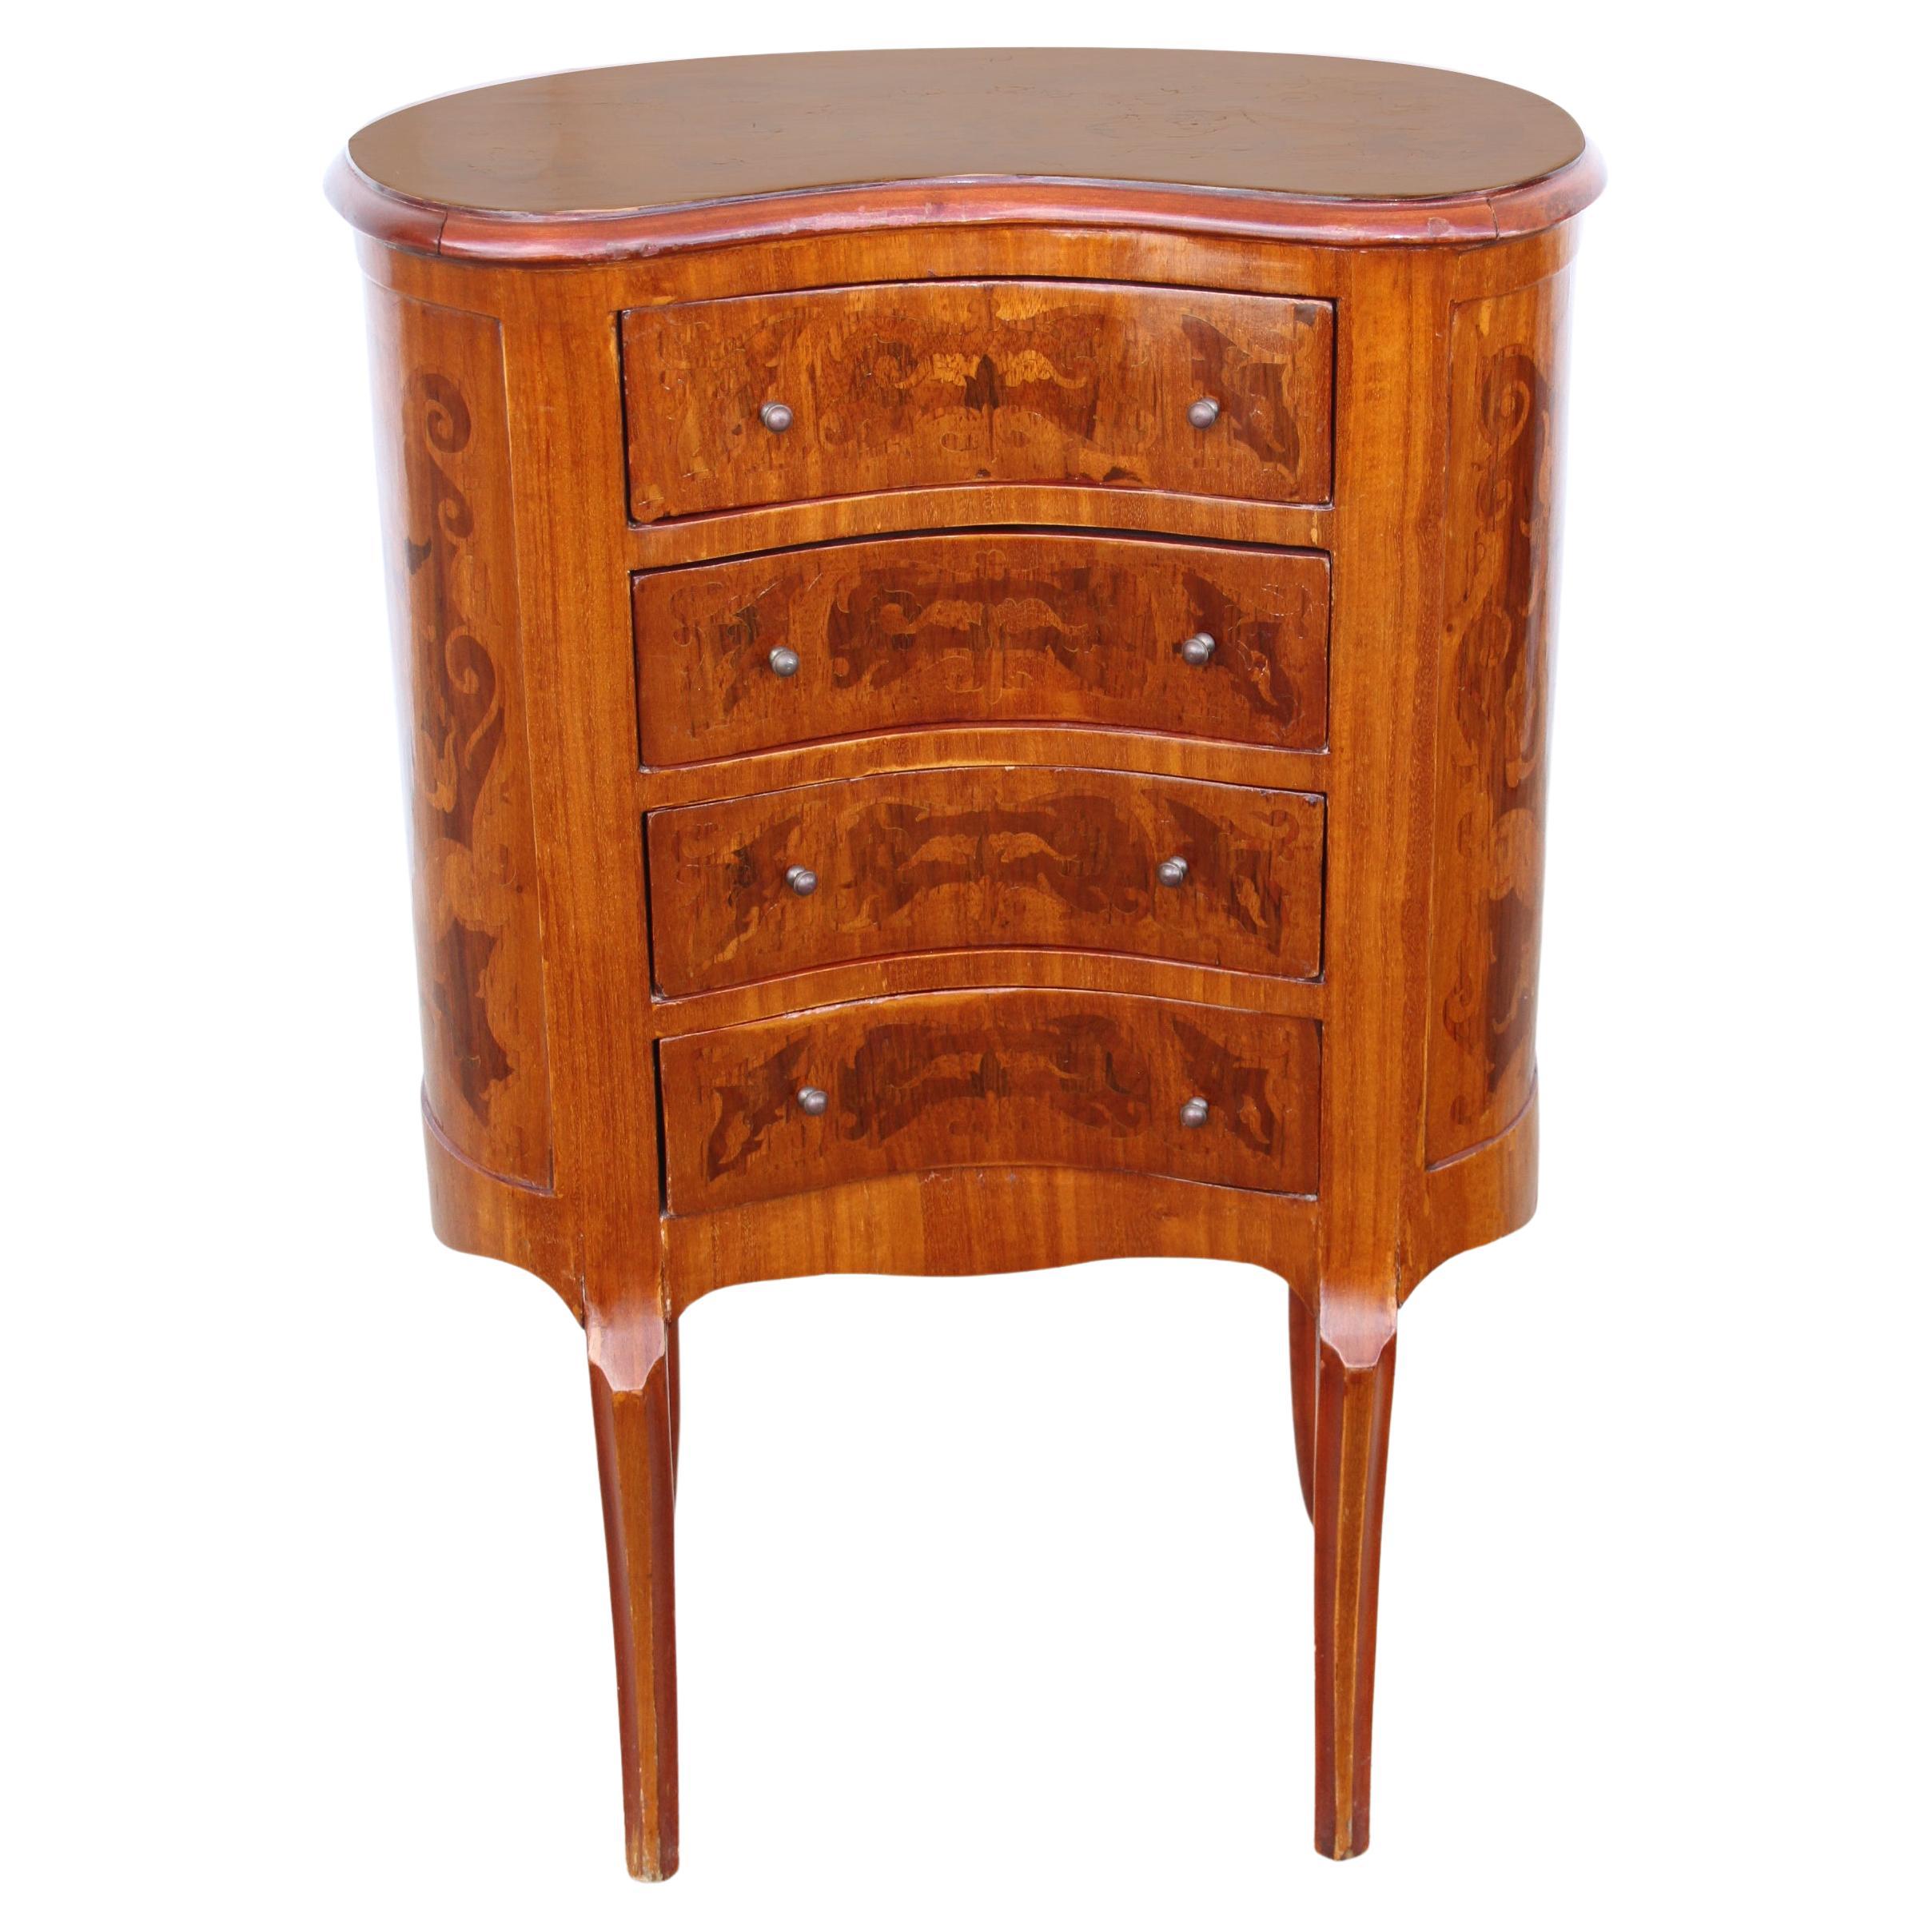 French Louis XVI Style Kidney Shaped Side Table 

Paul Sormani style Inlaid side table with beautiful hand laid floral designs. Four drawers.  Cabriole tapered legs. Circa 1920 and shaped as a kidney, the fruit wood 